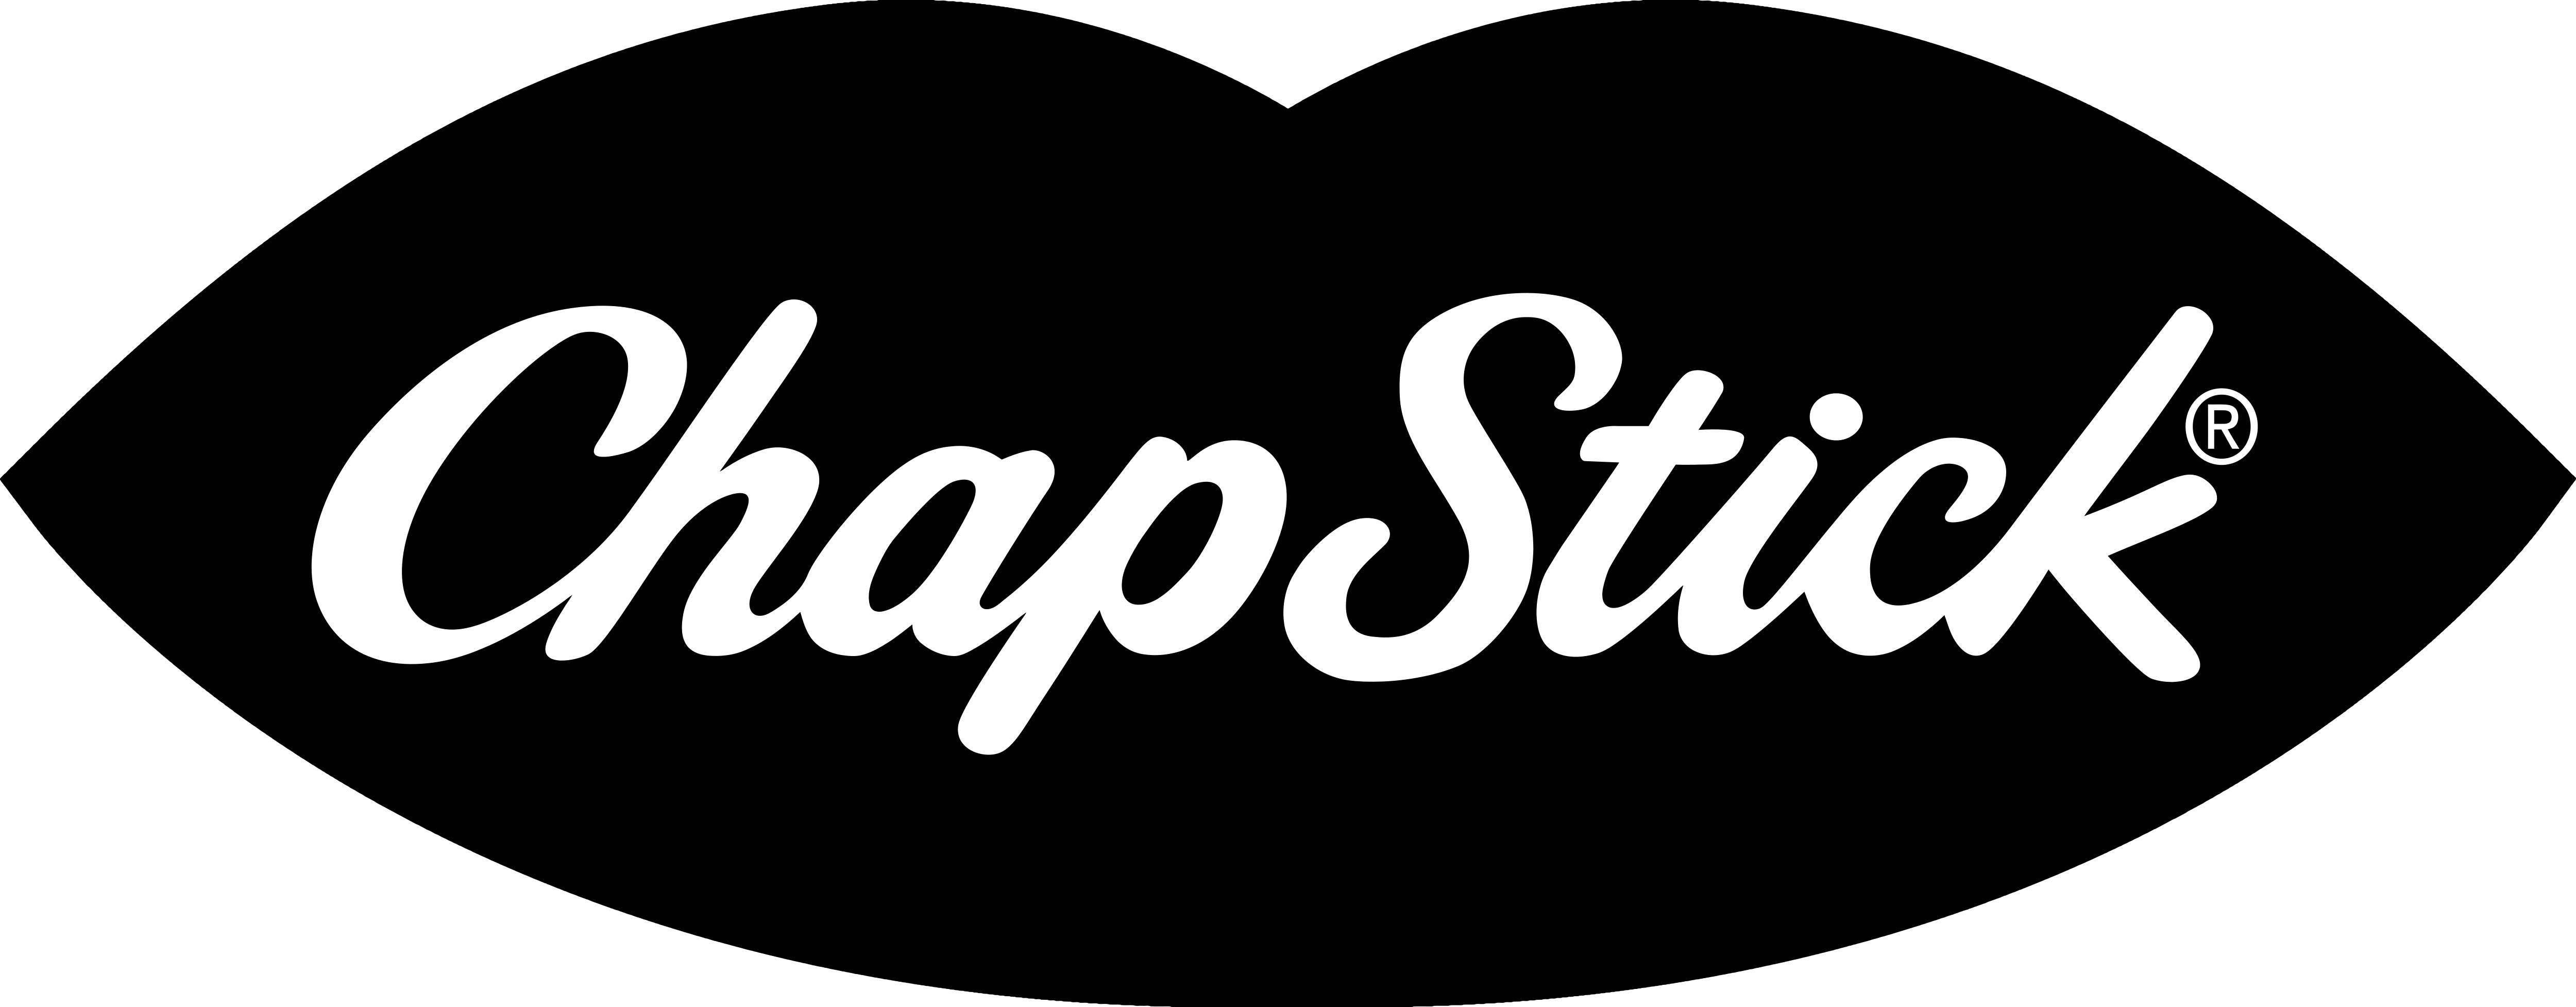 Inspiration Chapstick Logo Facts Meaning History And Png Logocharts Your 1 Source For 5248